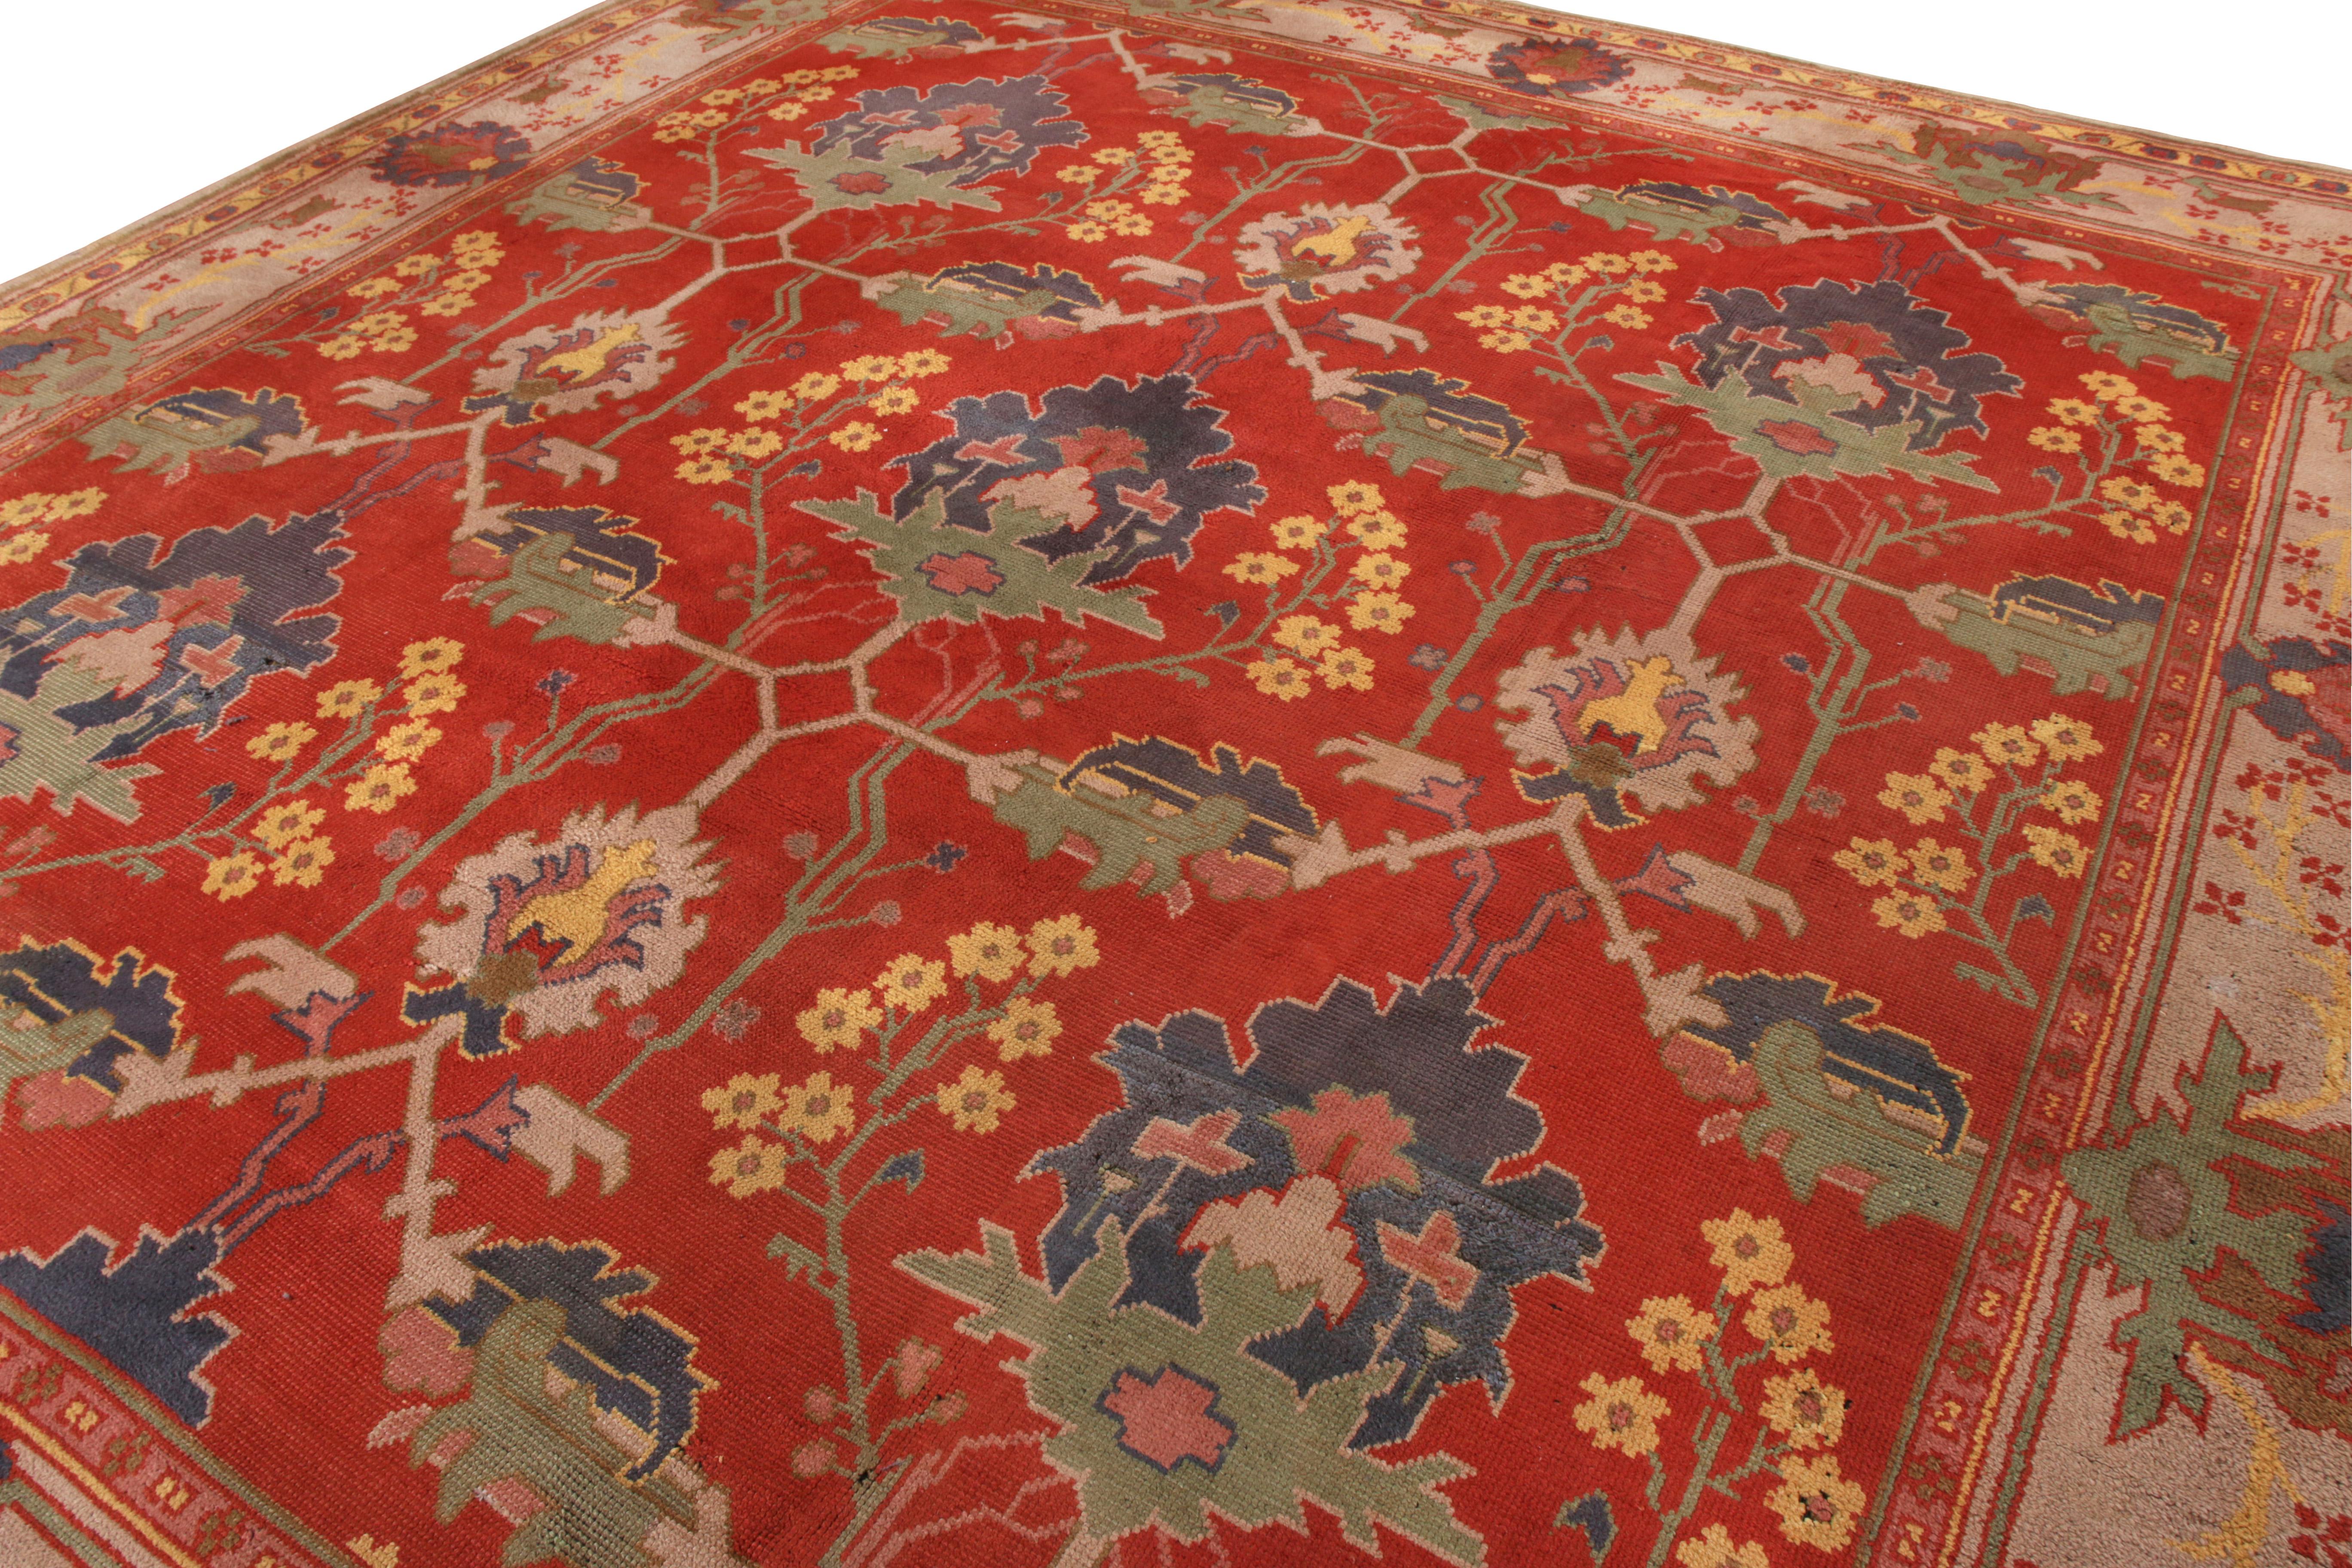 Arts and Crafts Antique Voysey Arts & Crafts Rug in Red with Floral Patterns For Sale